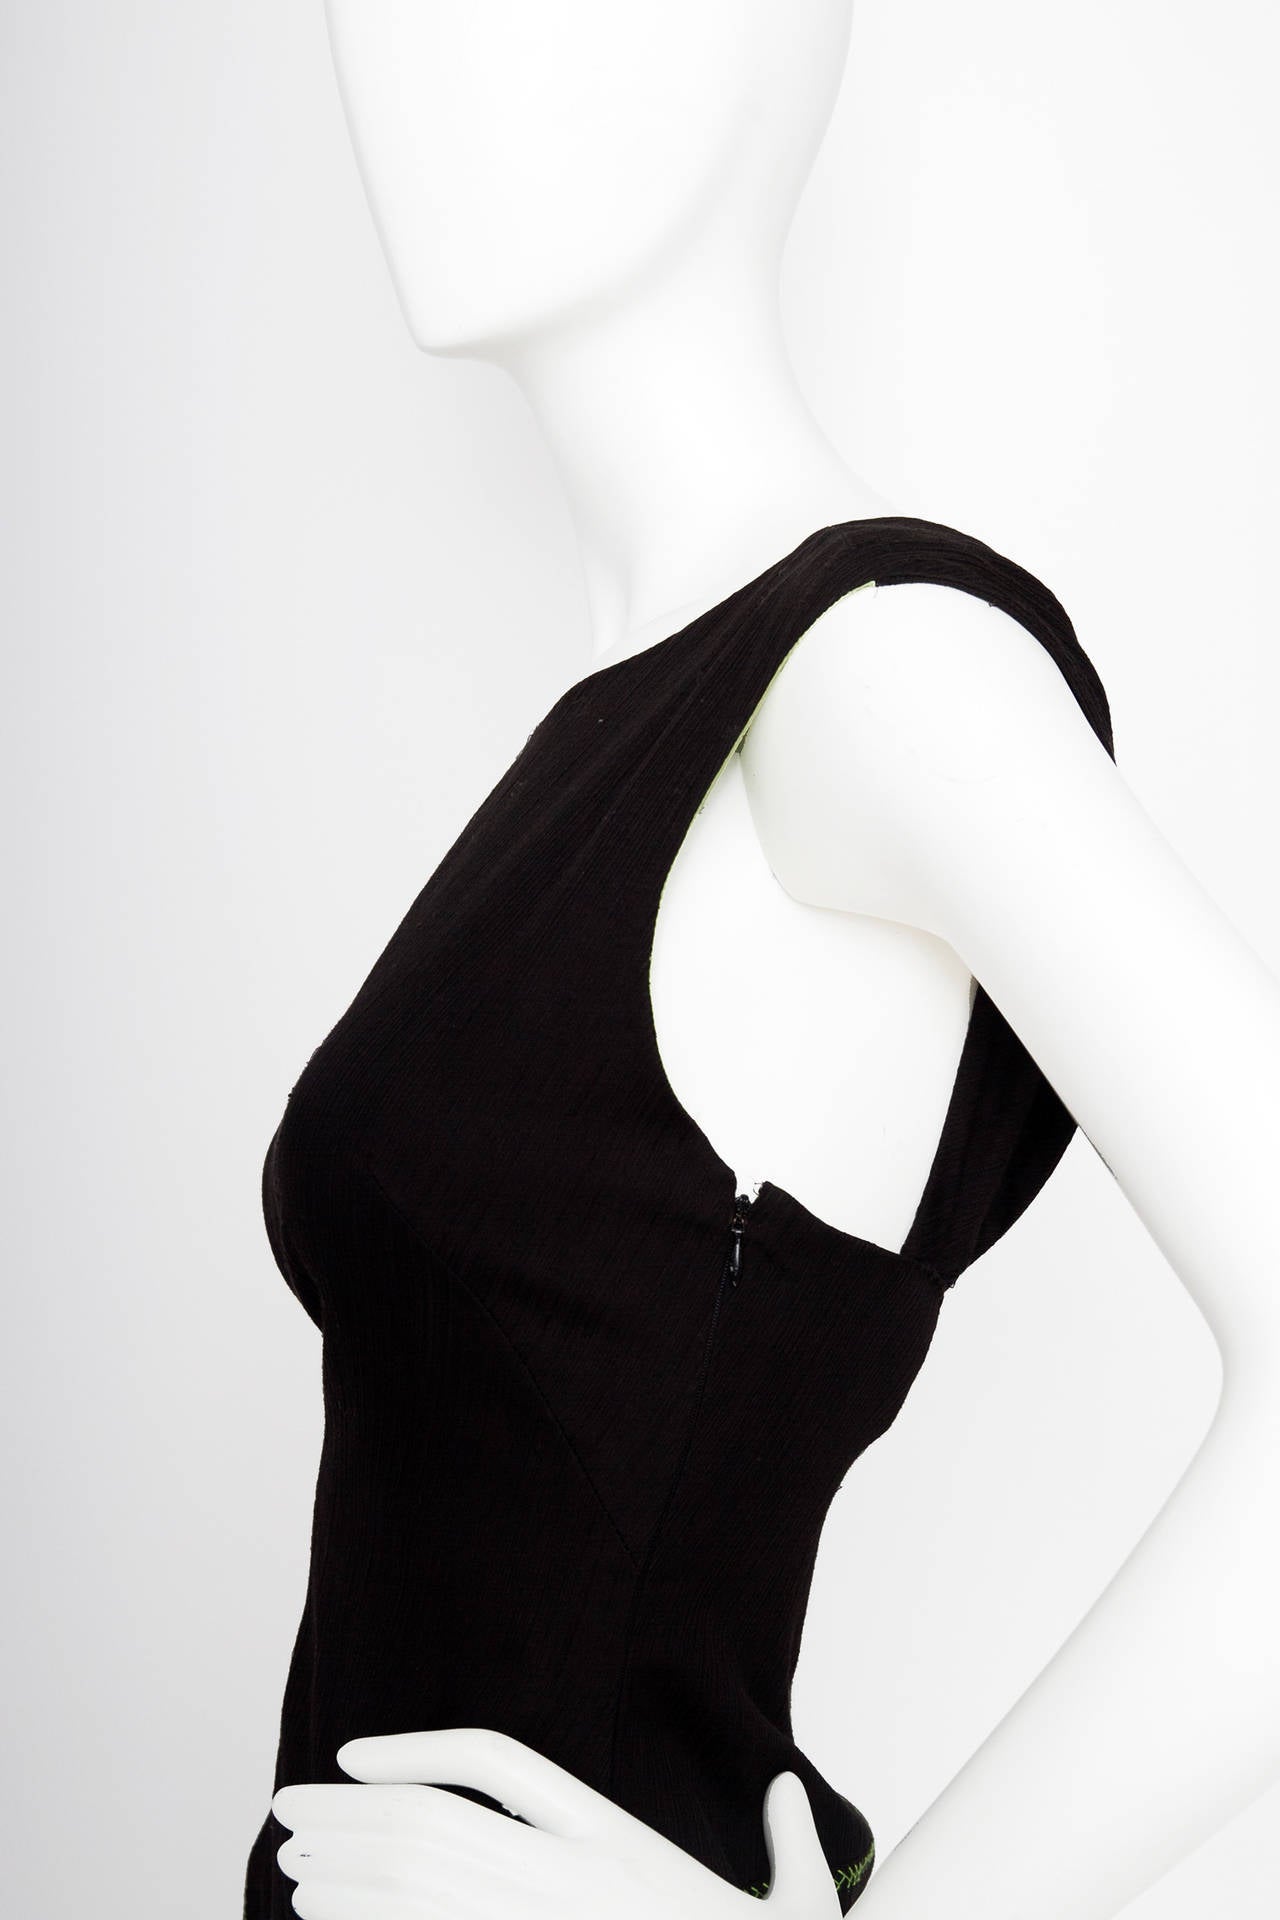 1980s Gianni Versace Couture Black Cotton Dress W. Green Topstitching For Sale 4